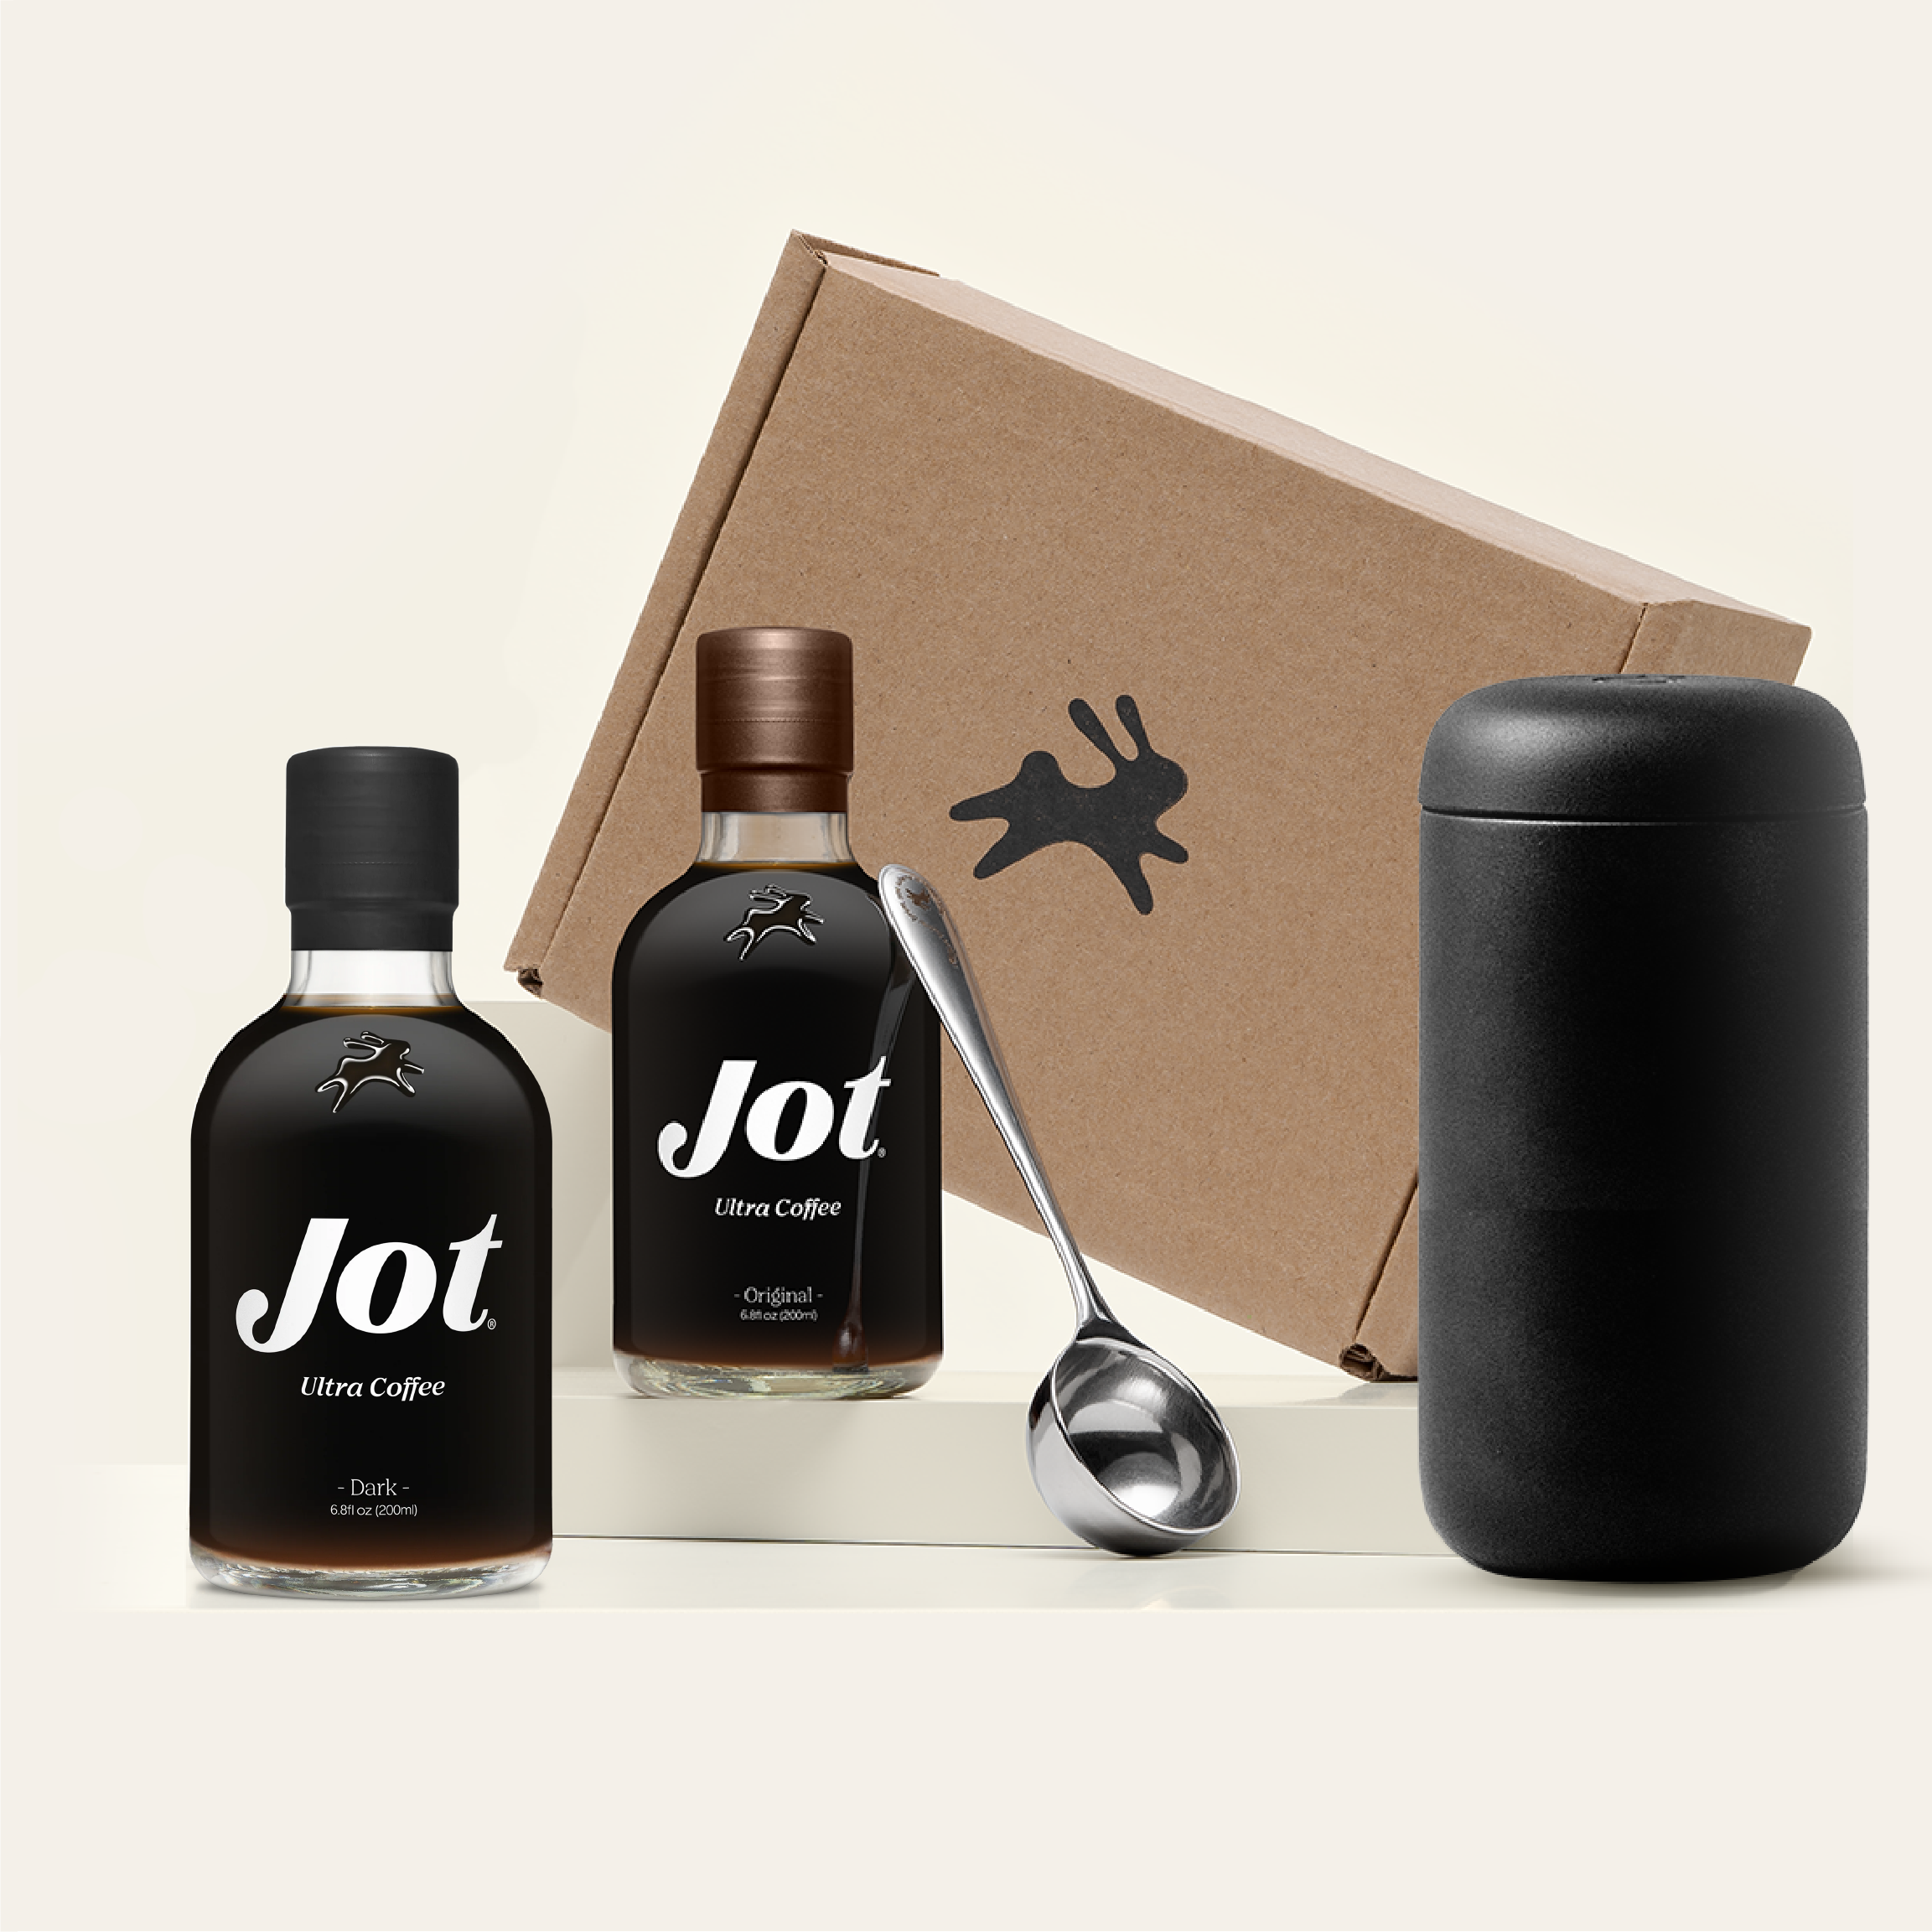 Two bottles of Jot ultra coffee, a spoon, and a portable cup next to a cardboard box.